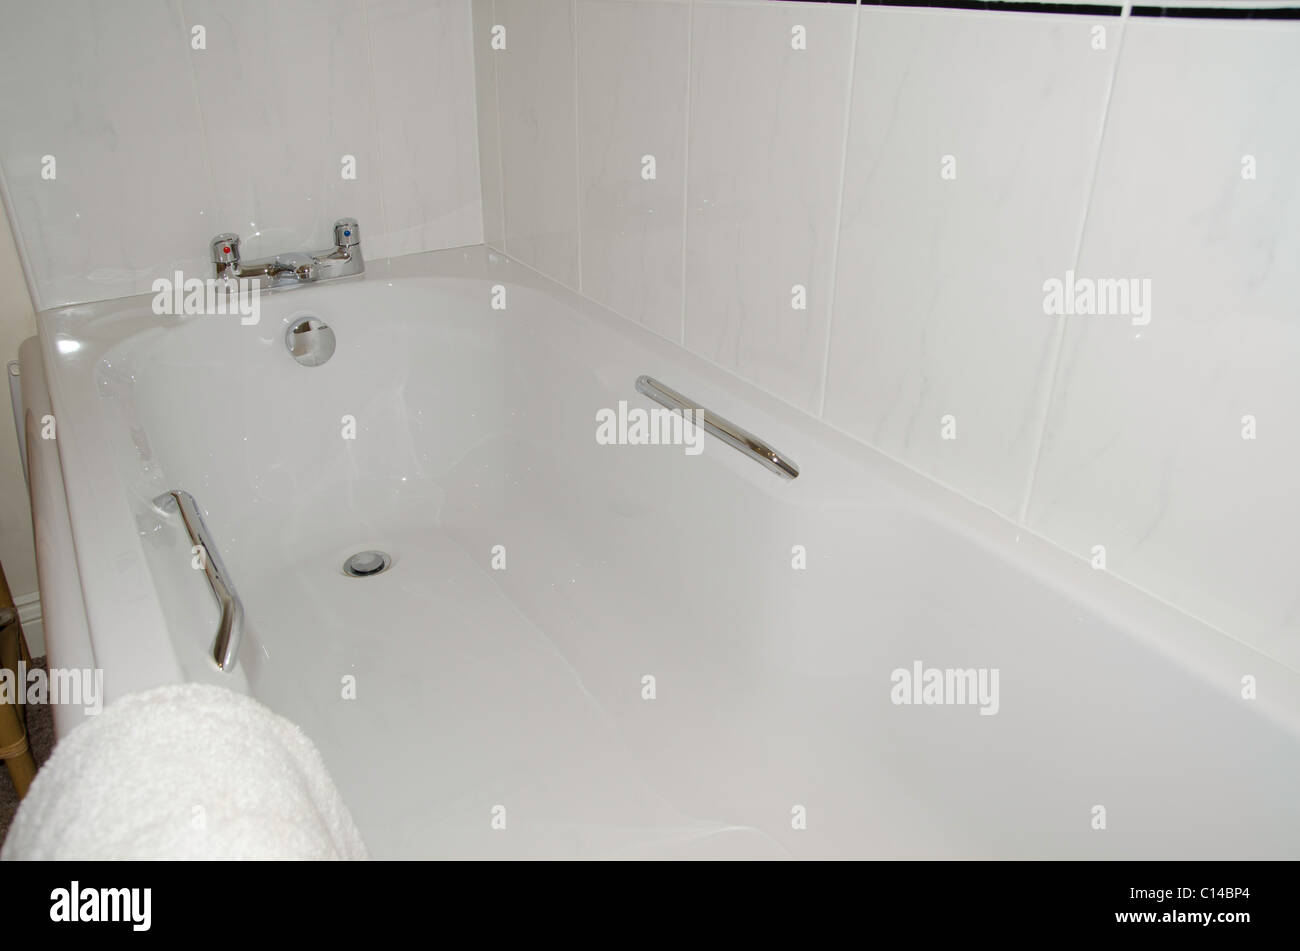 White bath with chrome fittings Stock Photo